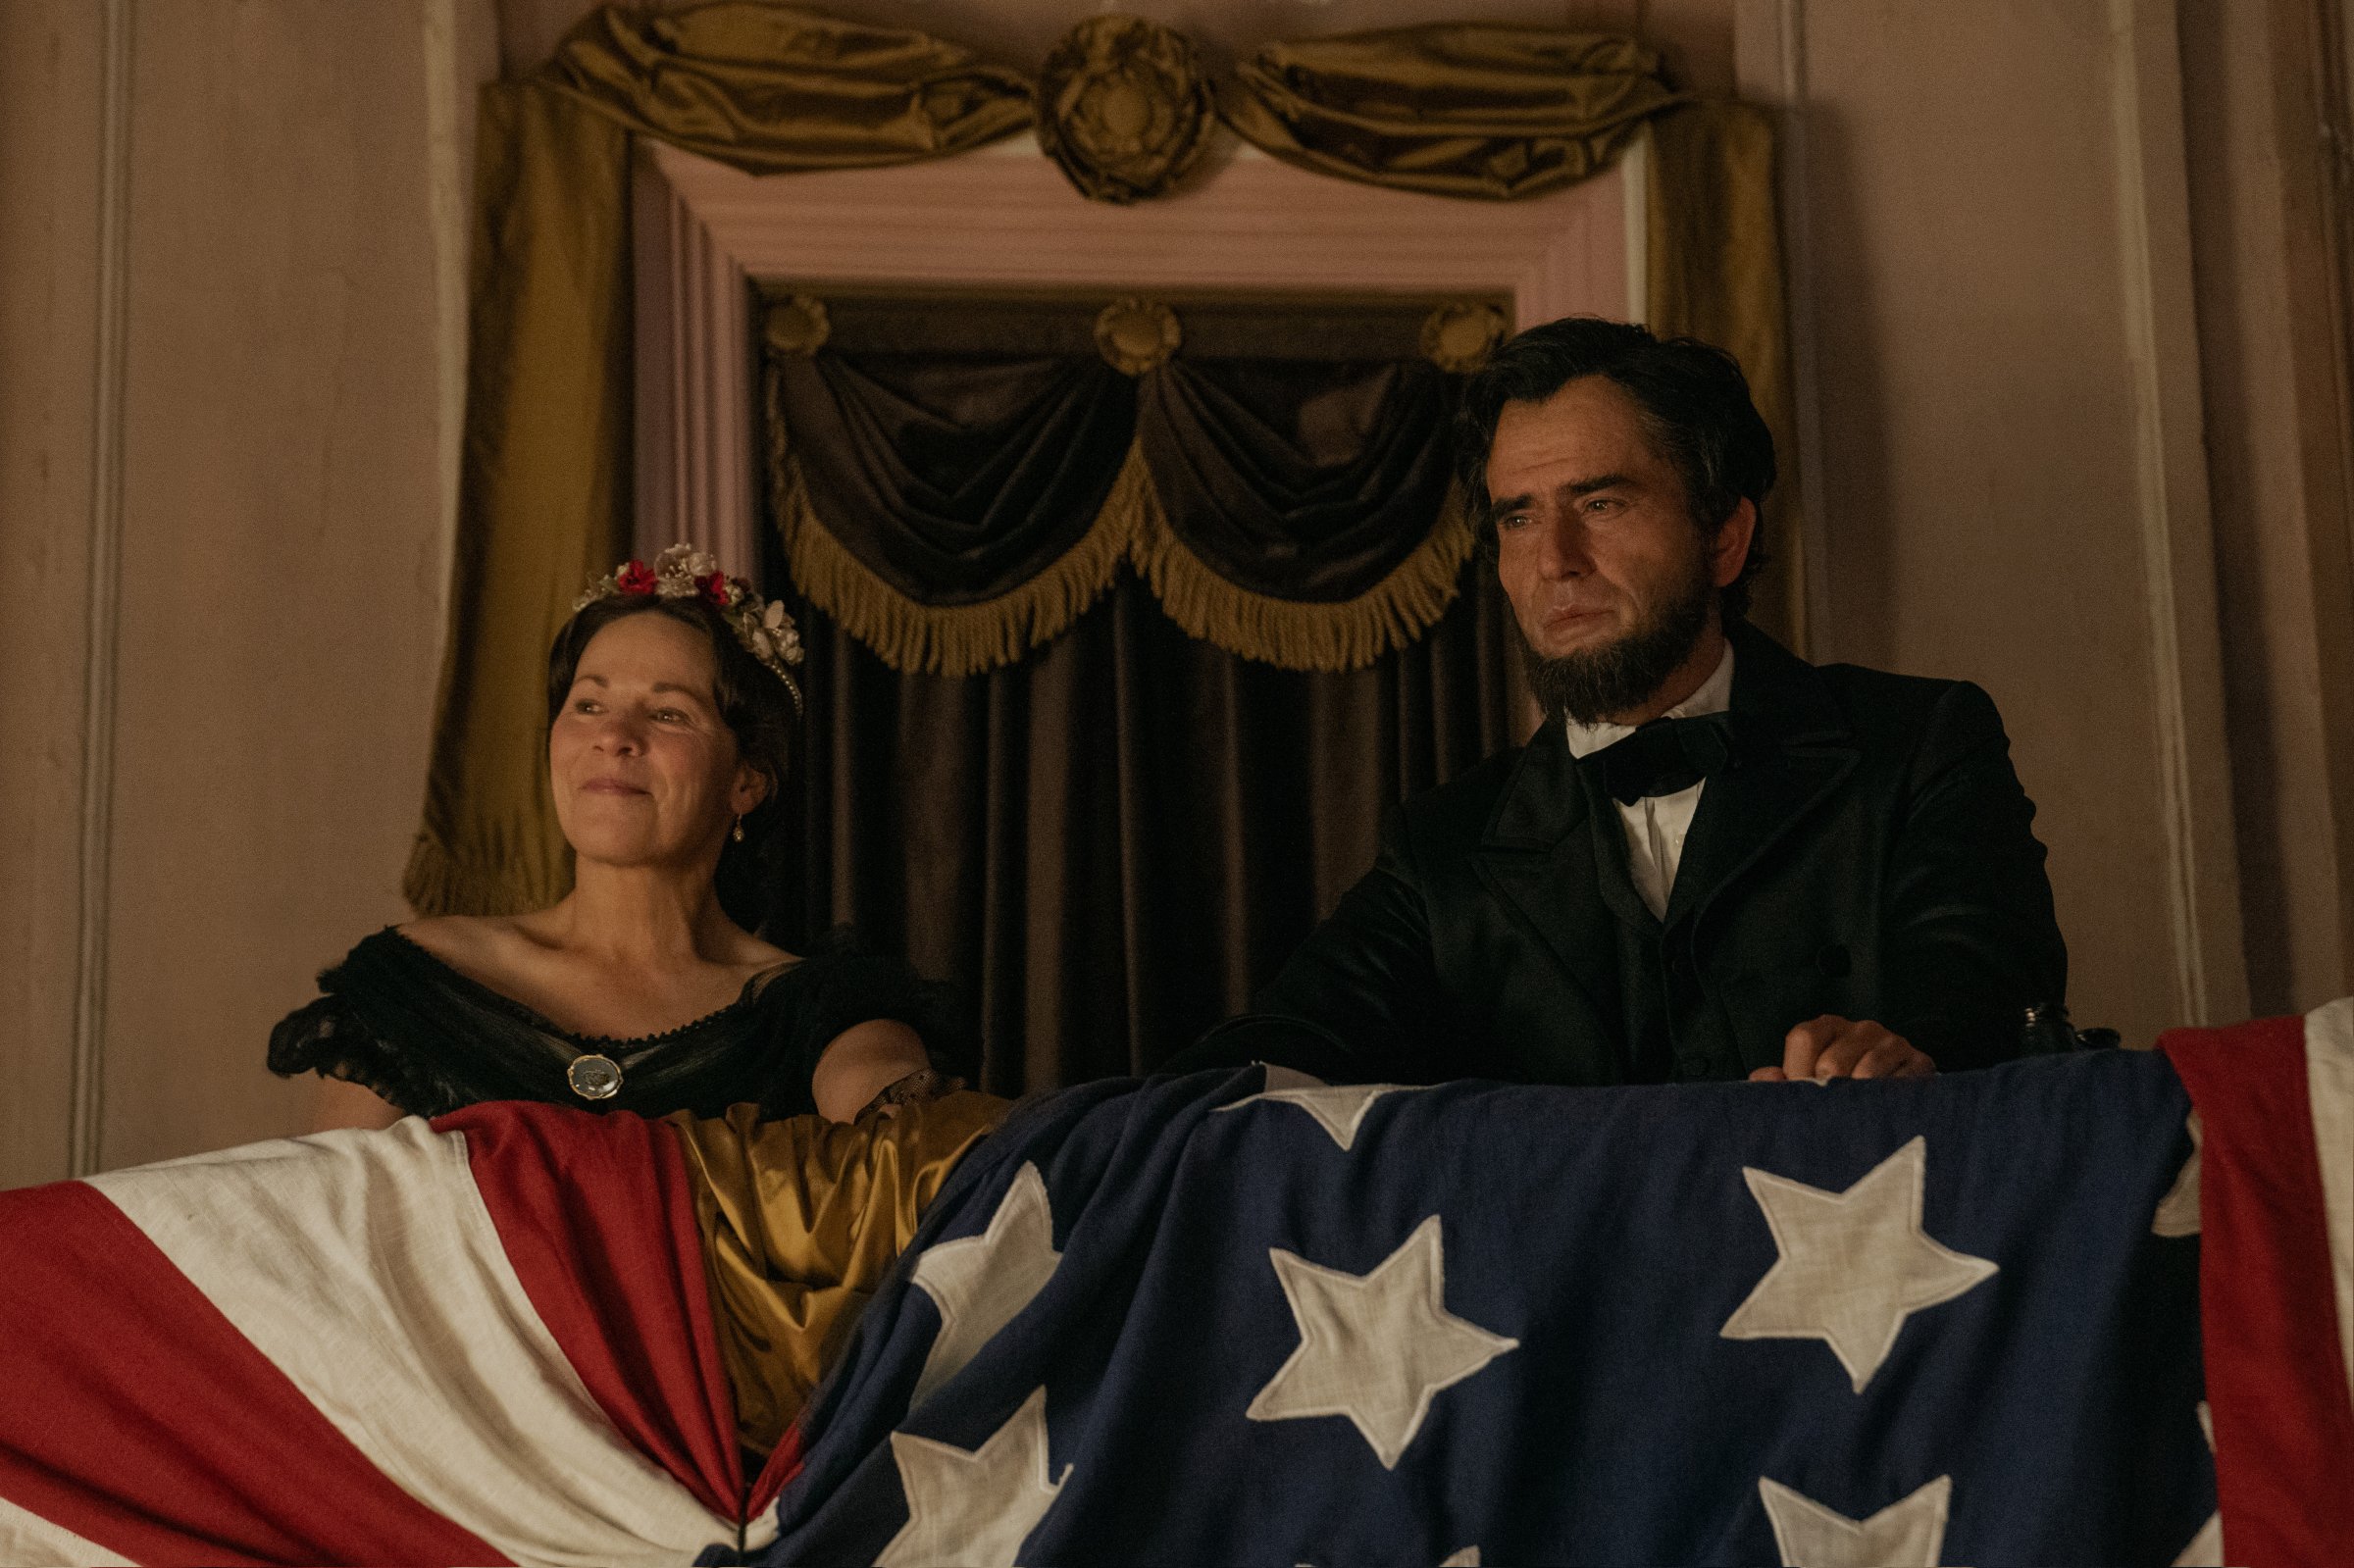 Abraham Lincoln at Ford's Theatre in the Apple TV+ show Manhunt